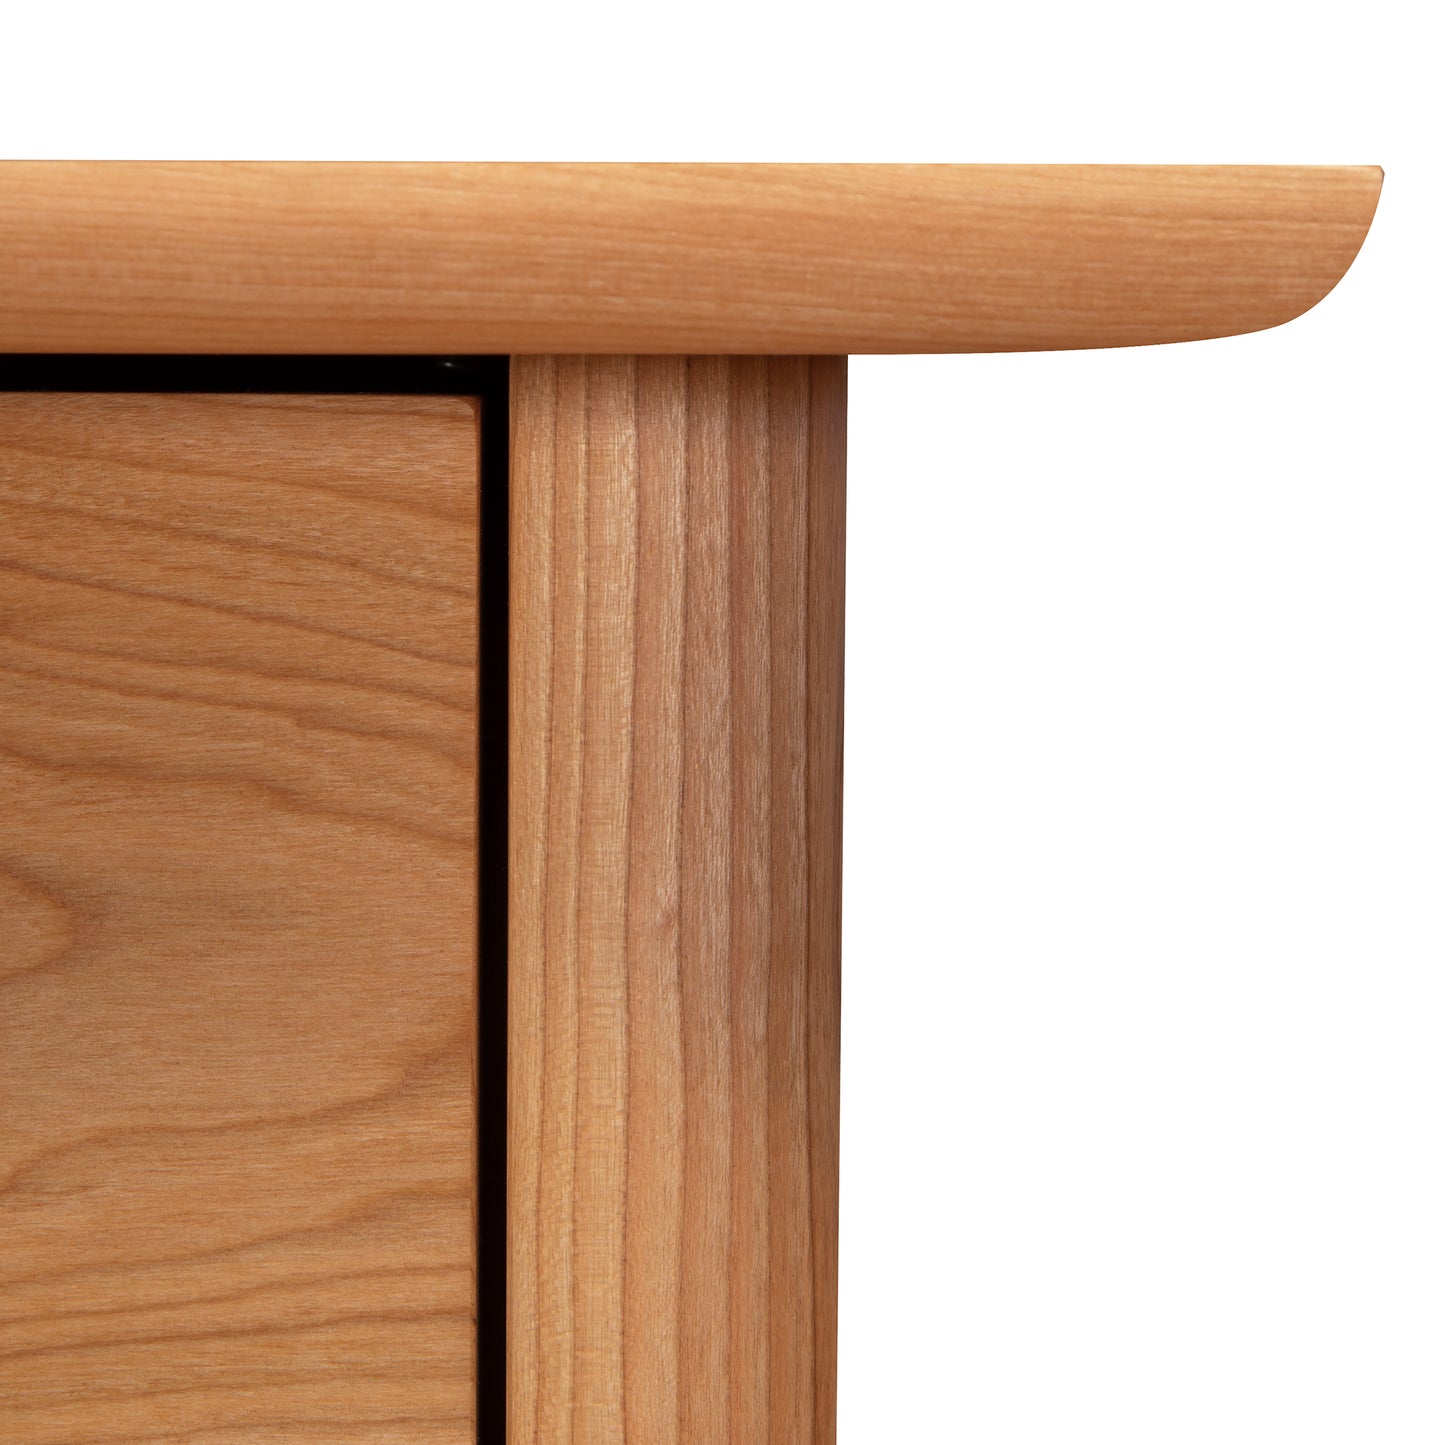 Close-up of a sustainably harvested Vermont Furniture Designs Heartwood Shaker Vertical File Cabinet corner showing the joint between the horizontal and vertical wooden pieces.